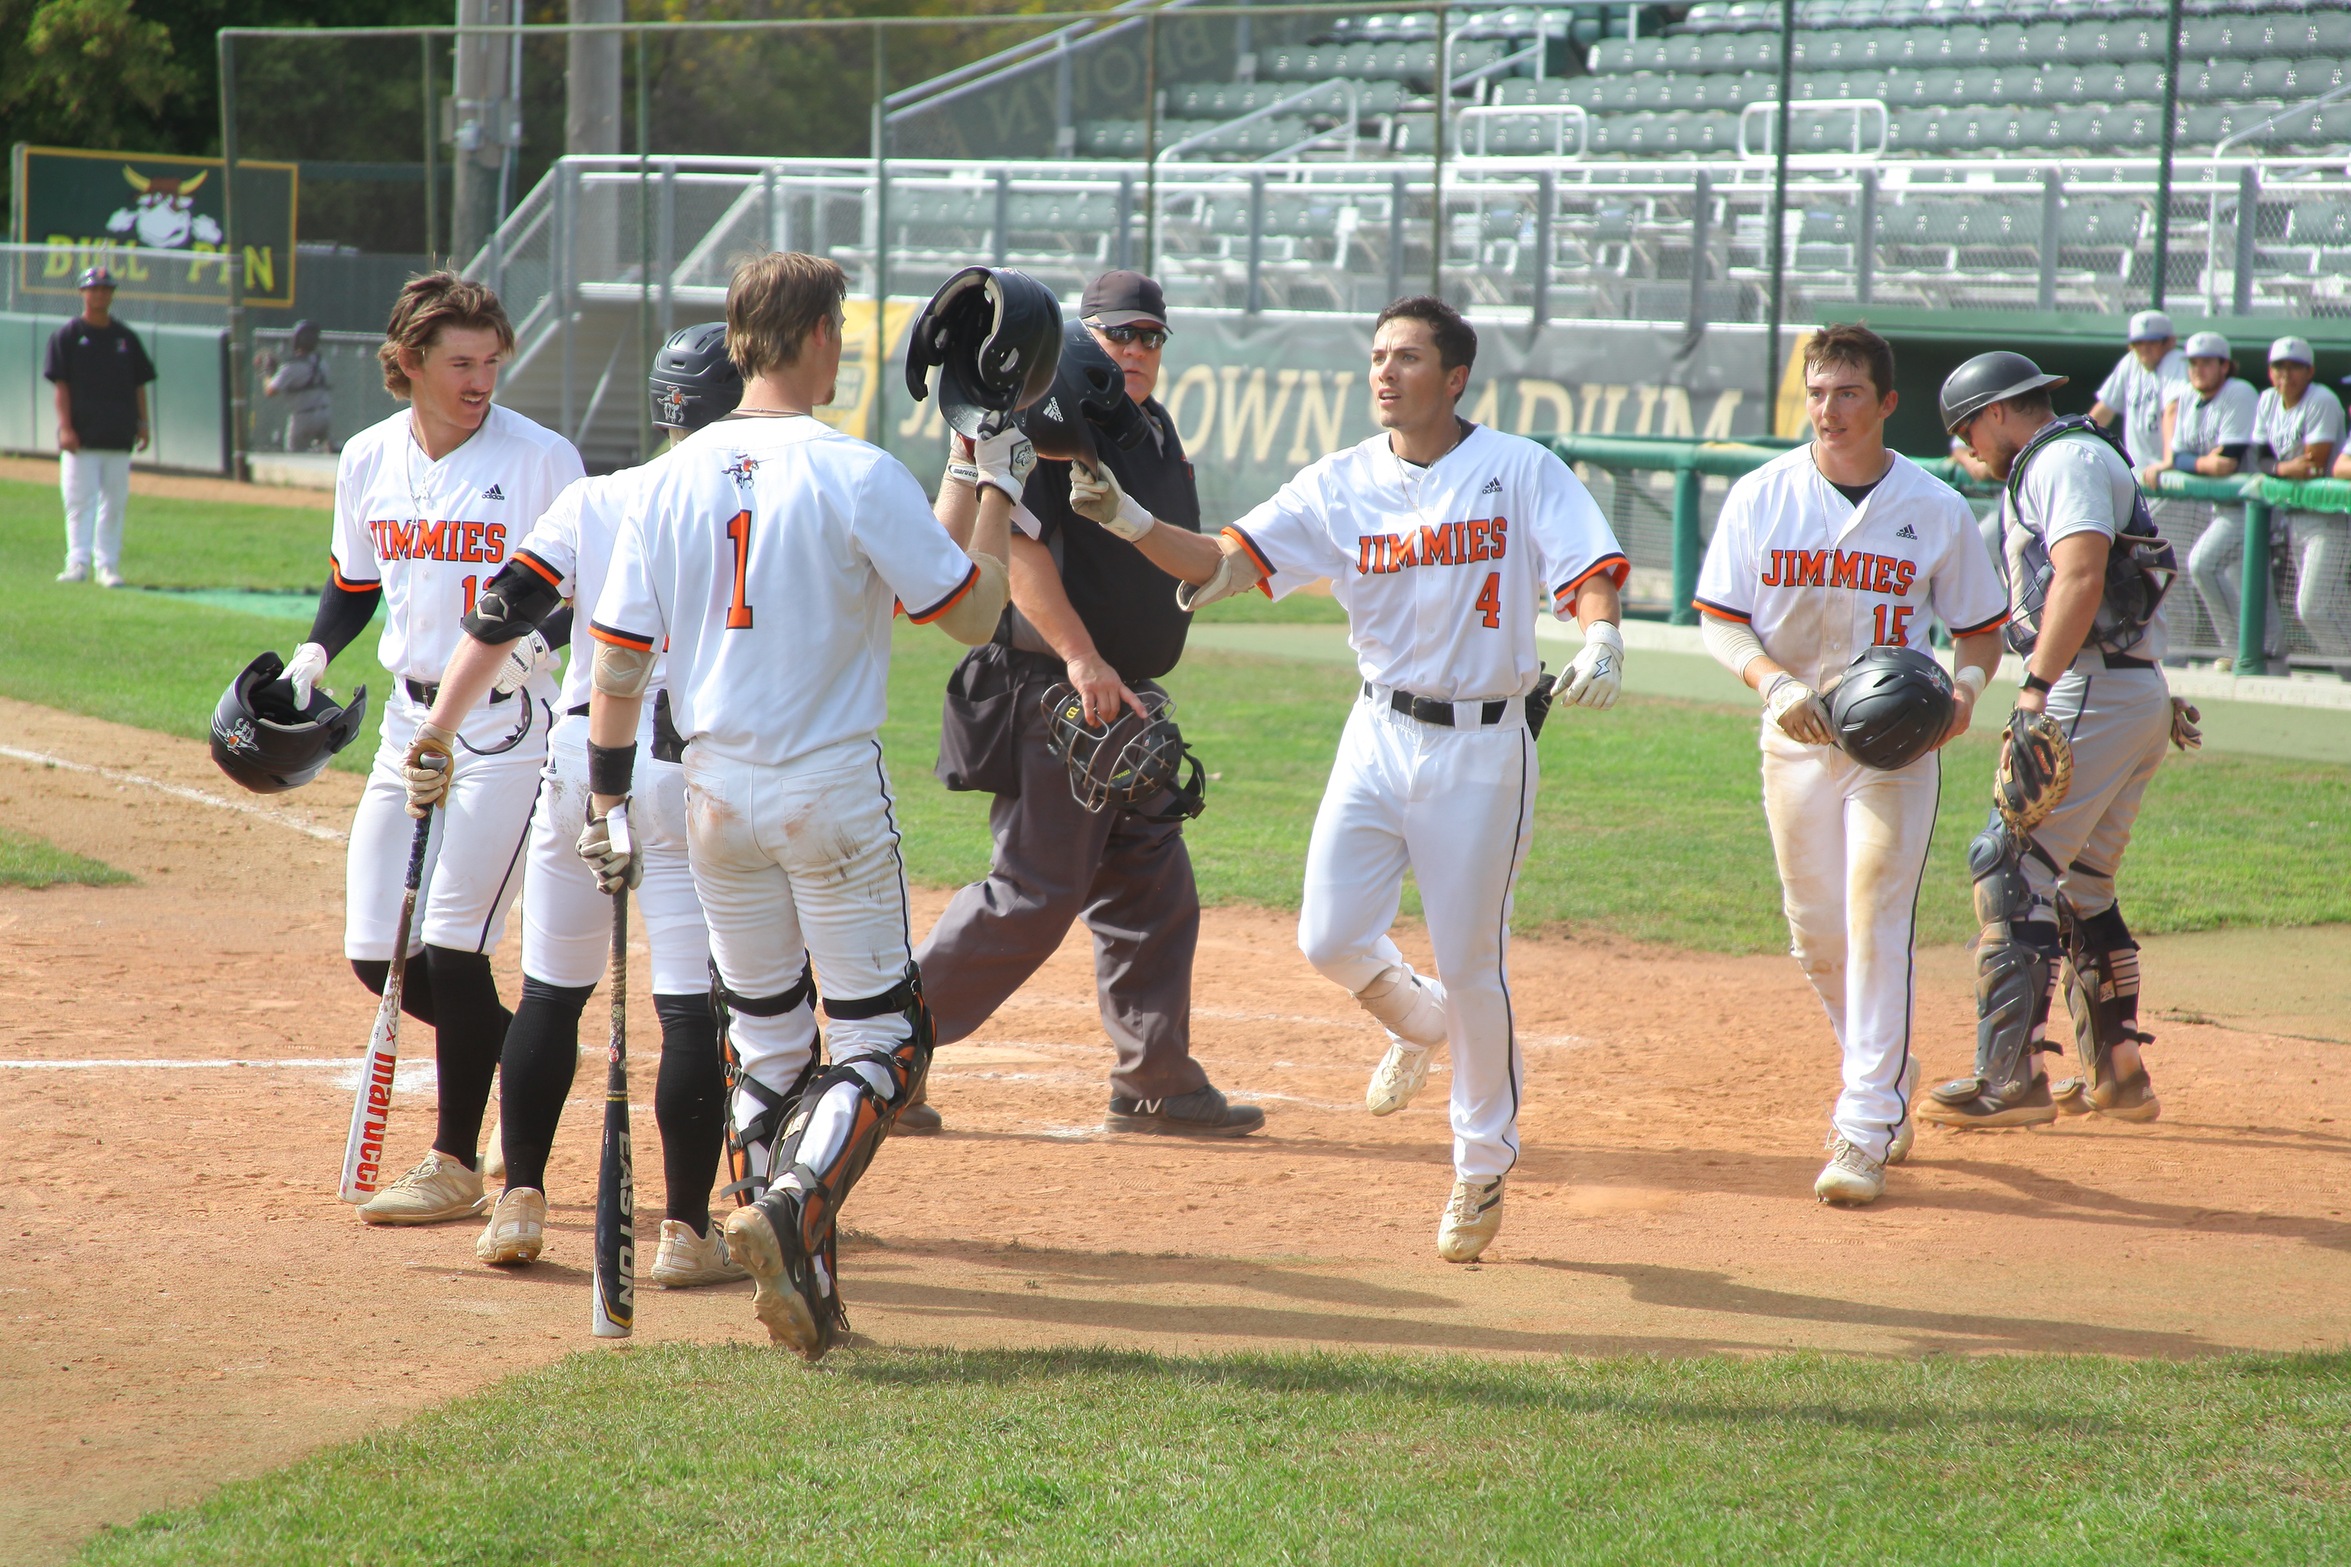 The Jimmies' Alex Alva (4) is congratulated by teammates after hitting a three-run home run in UJ's 5-0 game one victory over Dickinson State Thursday/Photo by Molly Dockter, UJ Sports Information